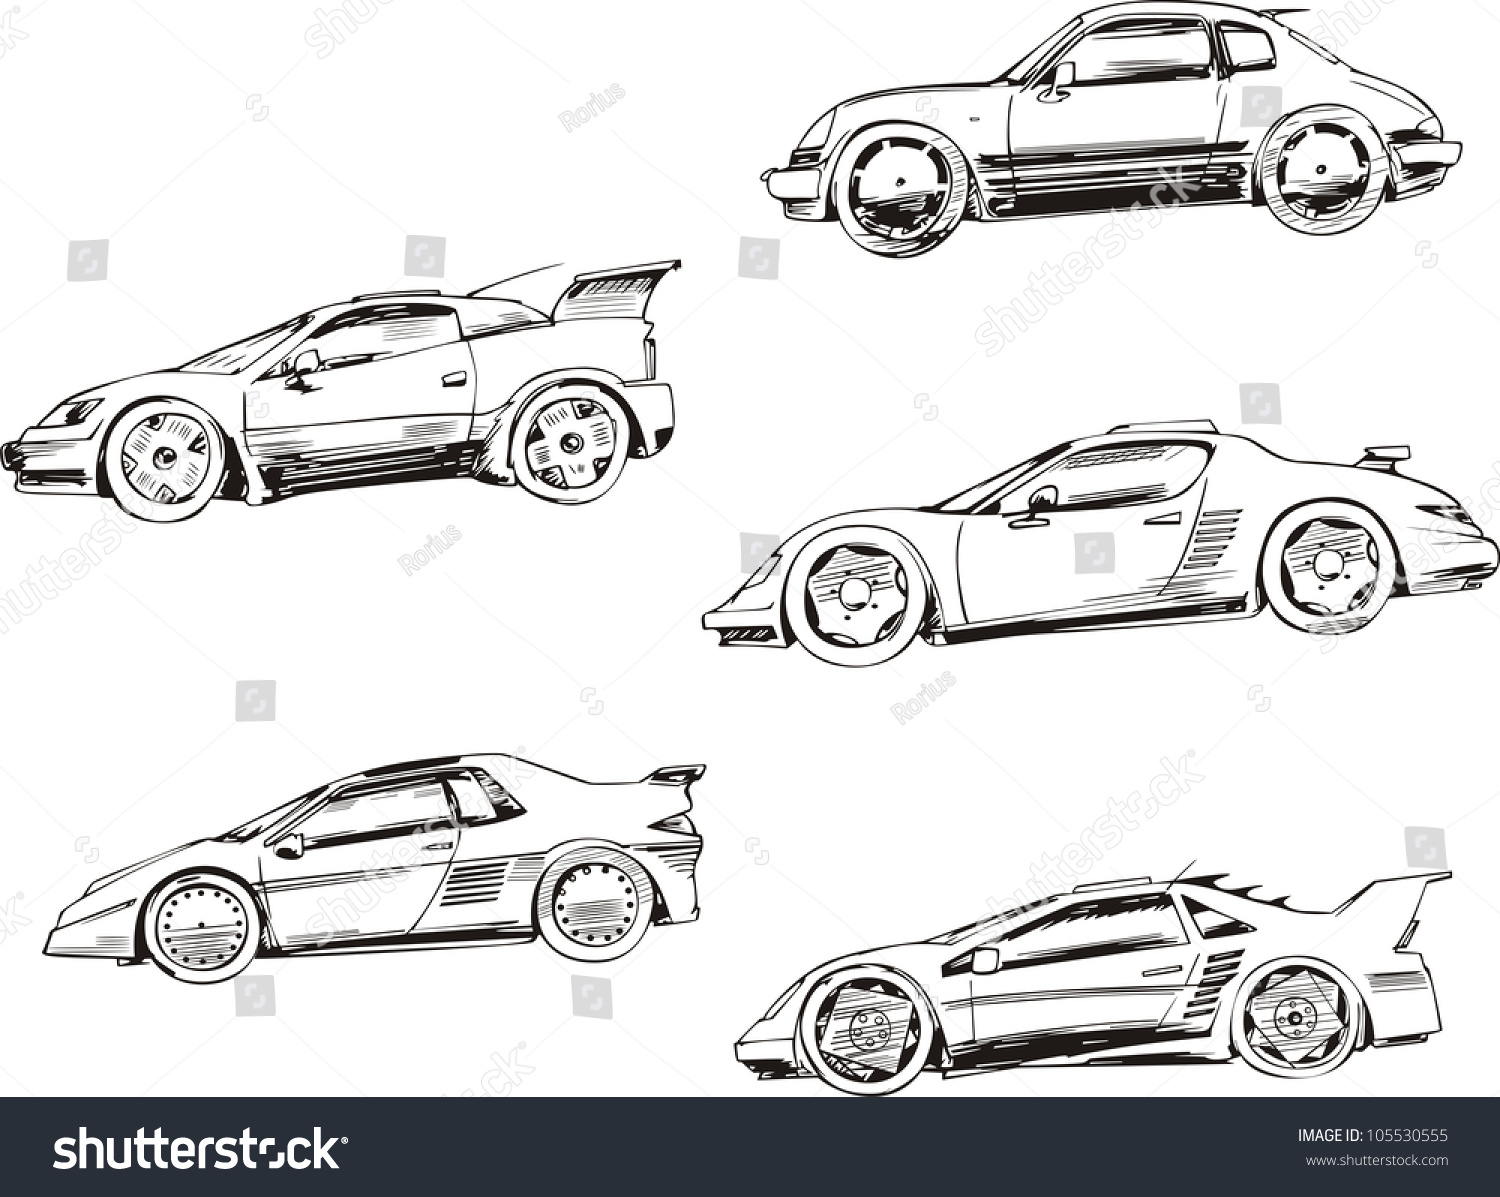 Sport Racing Noname Abstract Cars Set Stock Vector 105530555 - Shutterstock